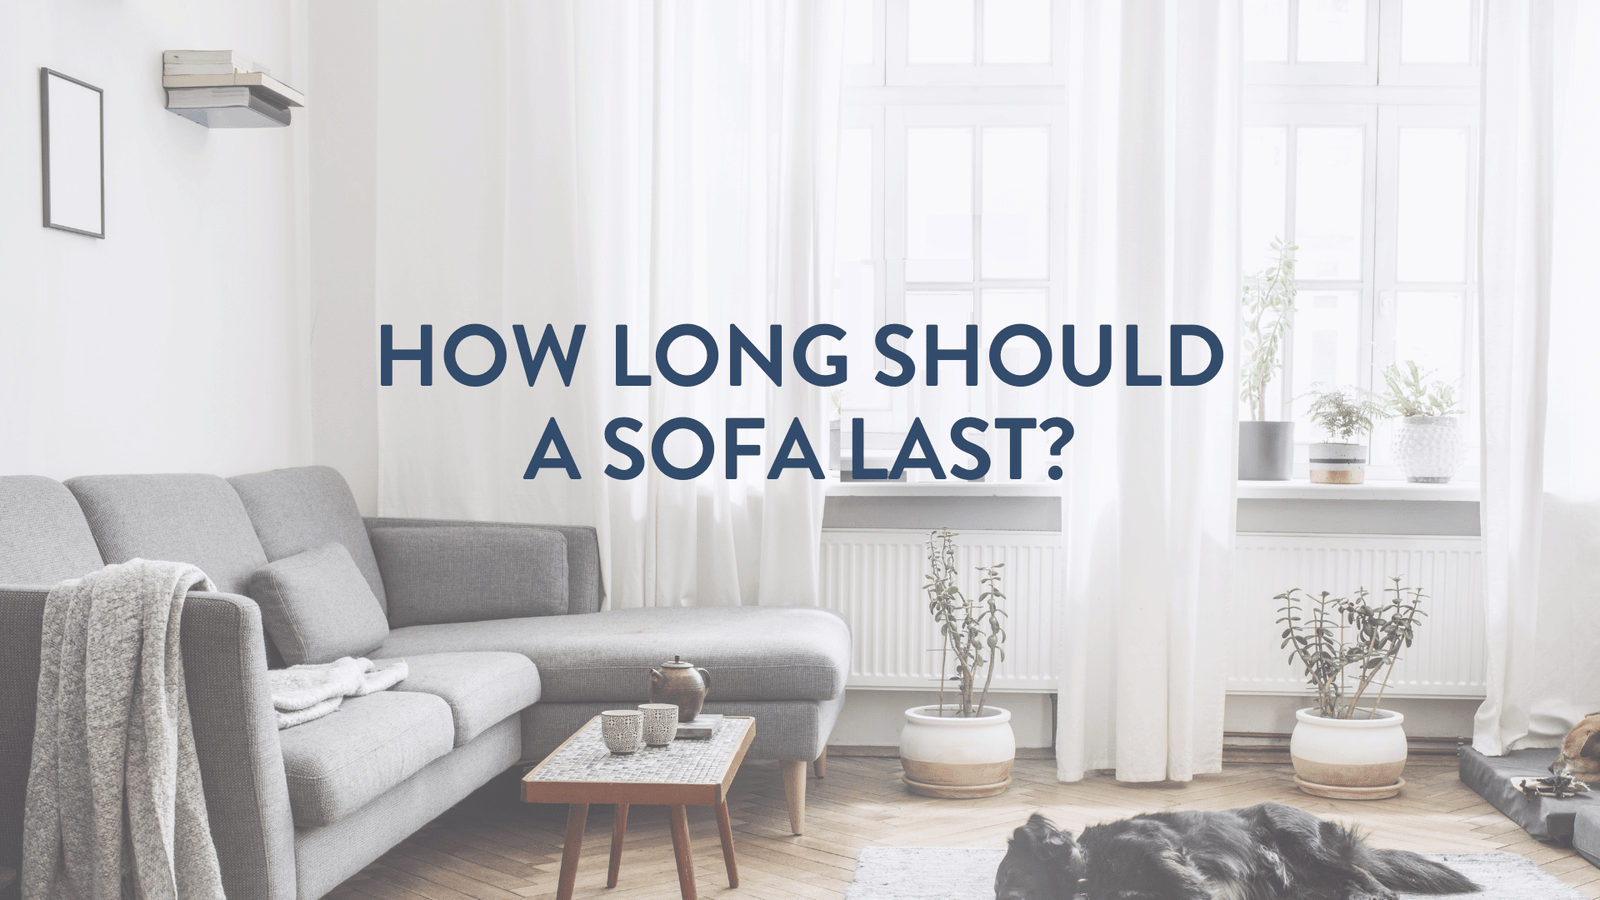 How long should a sofa last? sofa cushion refilling saggy foam feather fibre filling upholstery cleaning maintaining